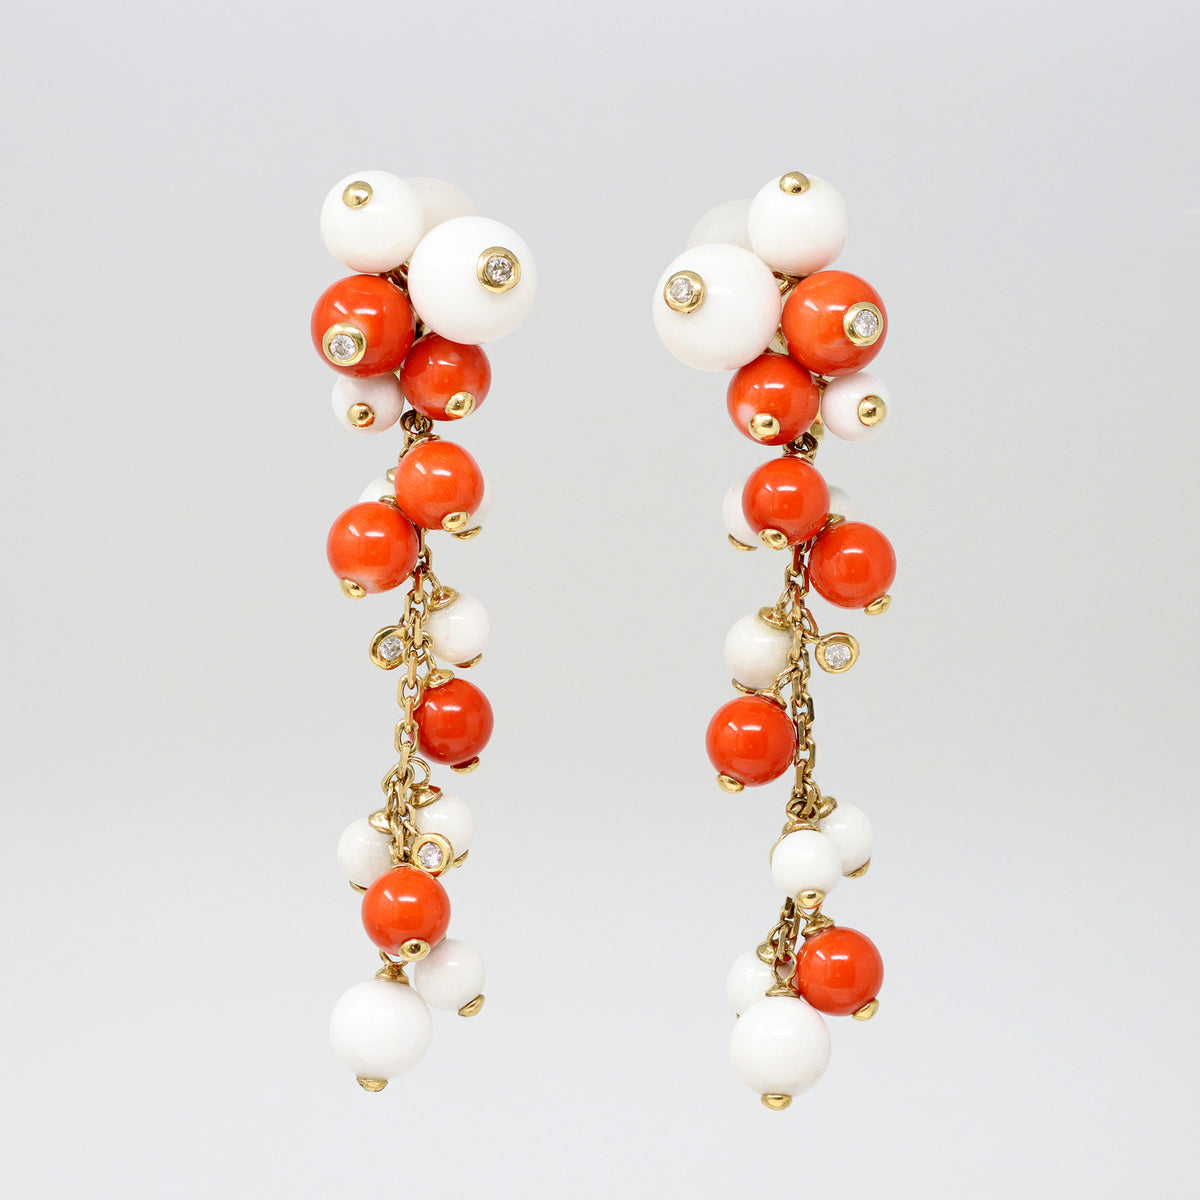 talian Coral, White Agate Beads and Diamonds Dangling Earrings in 18 Karat Gold with light background